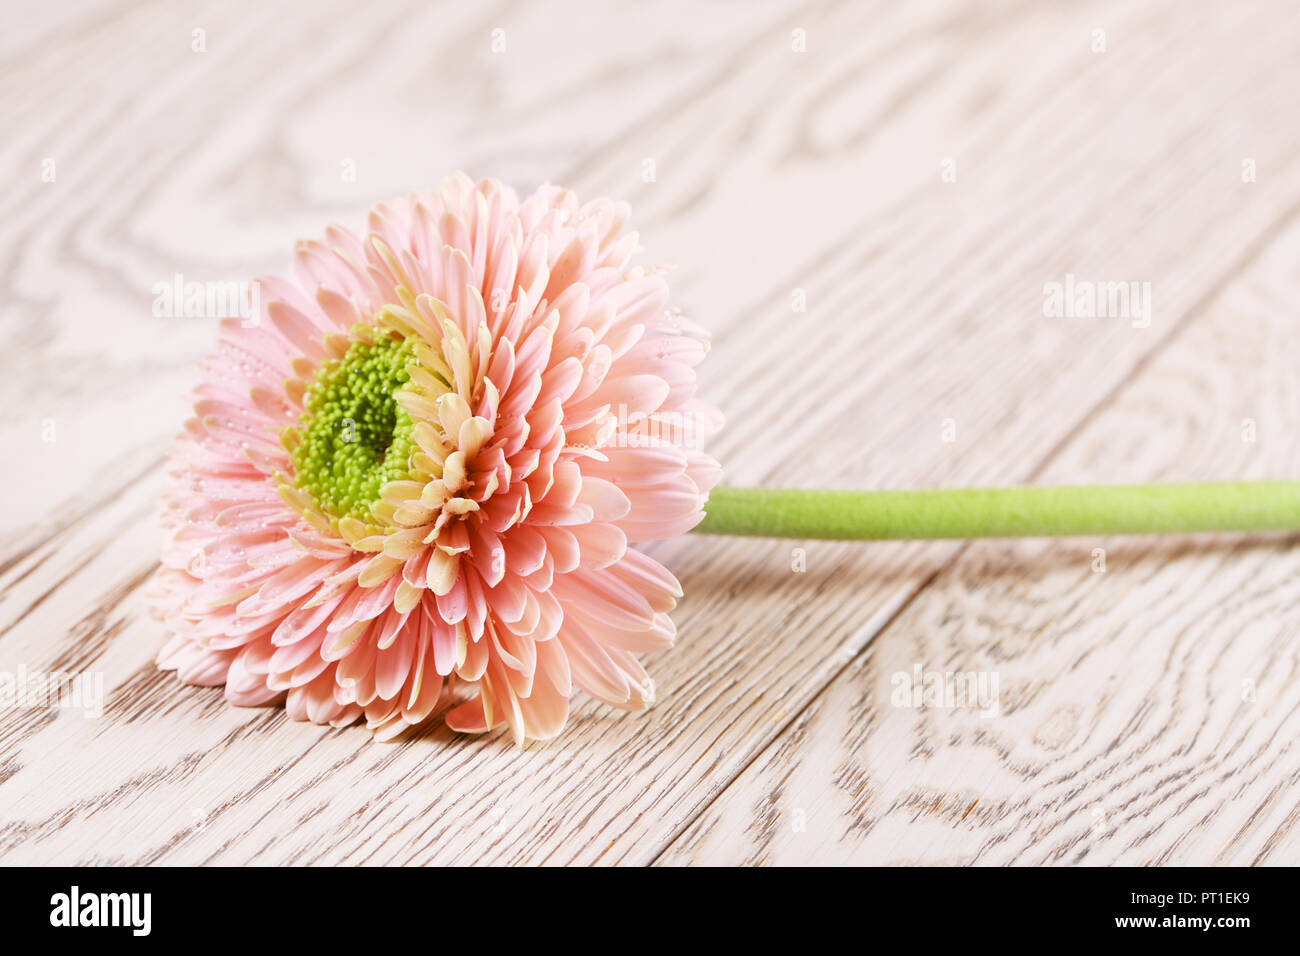 pink gerbera daisy flower on wooden background Stock Photo